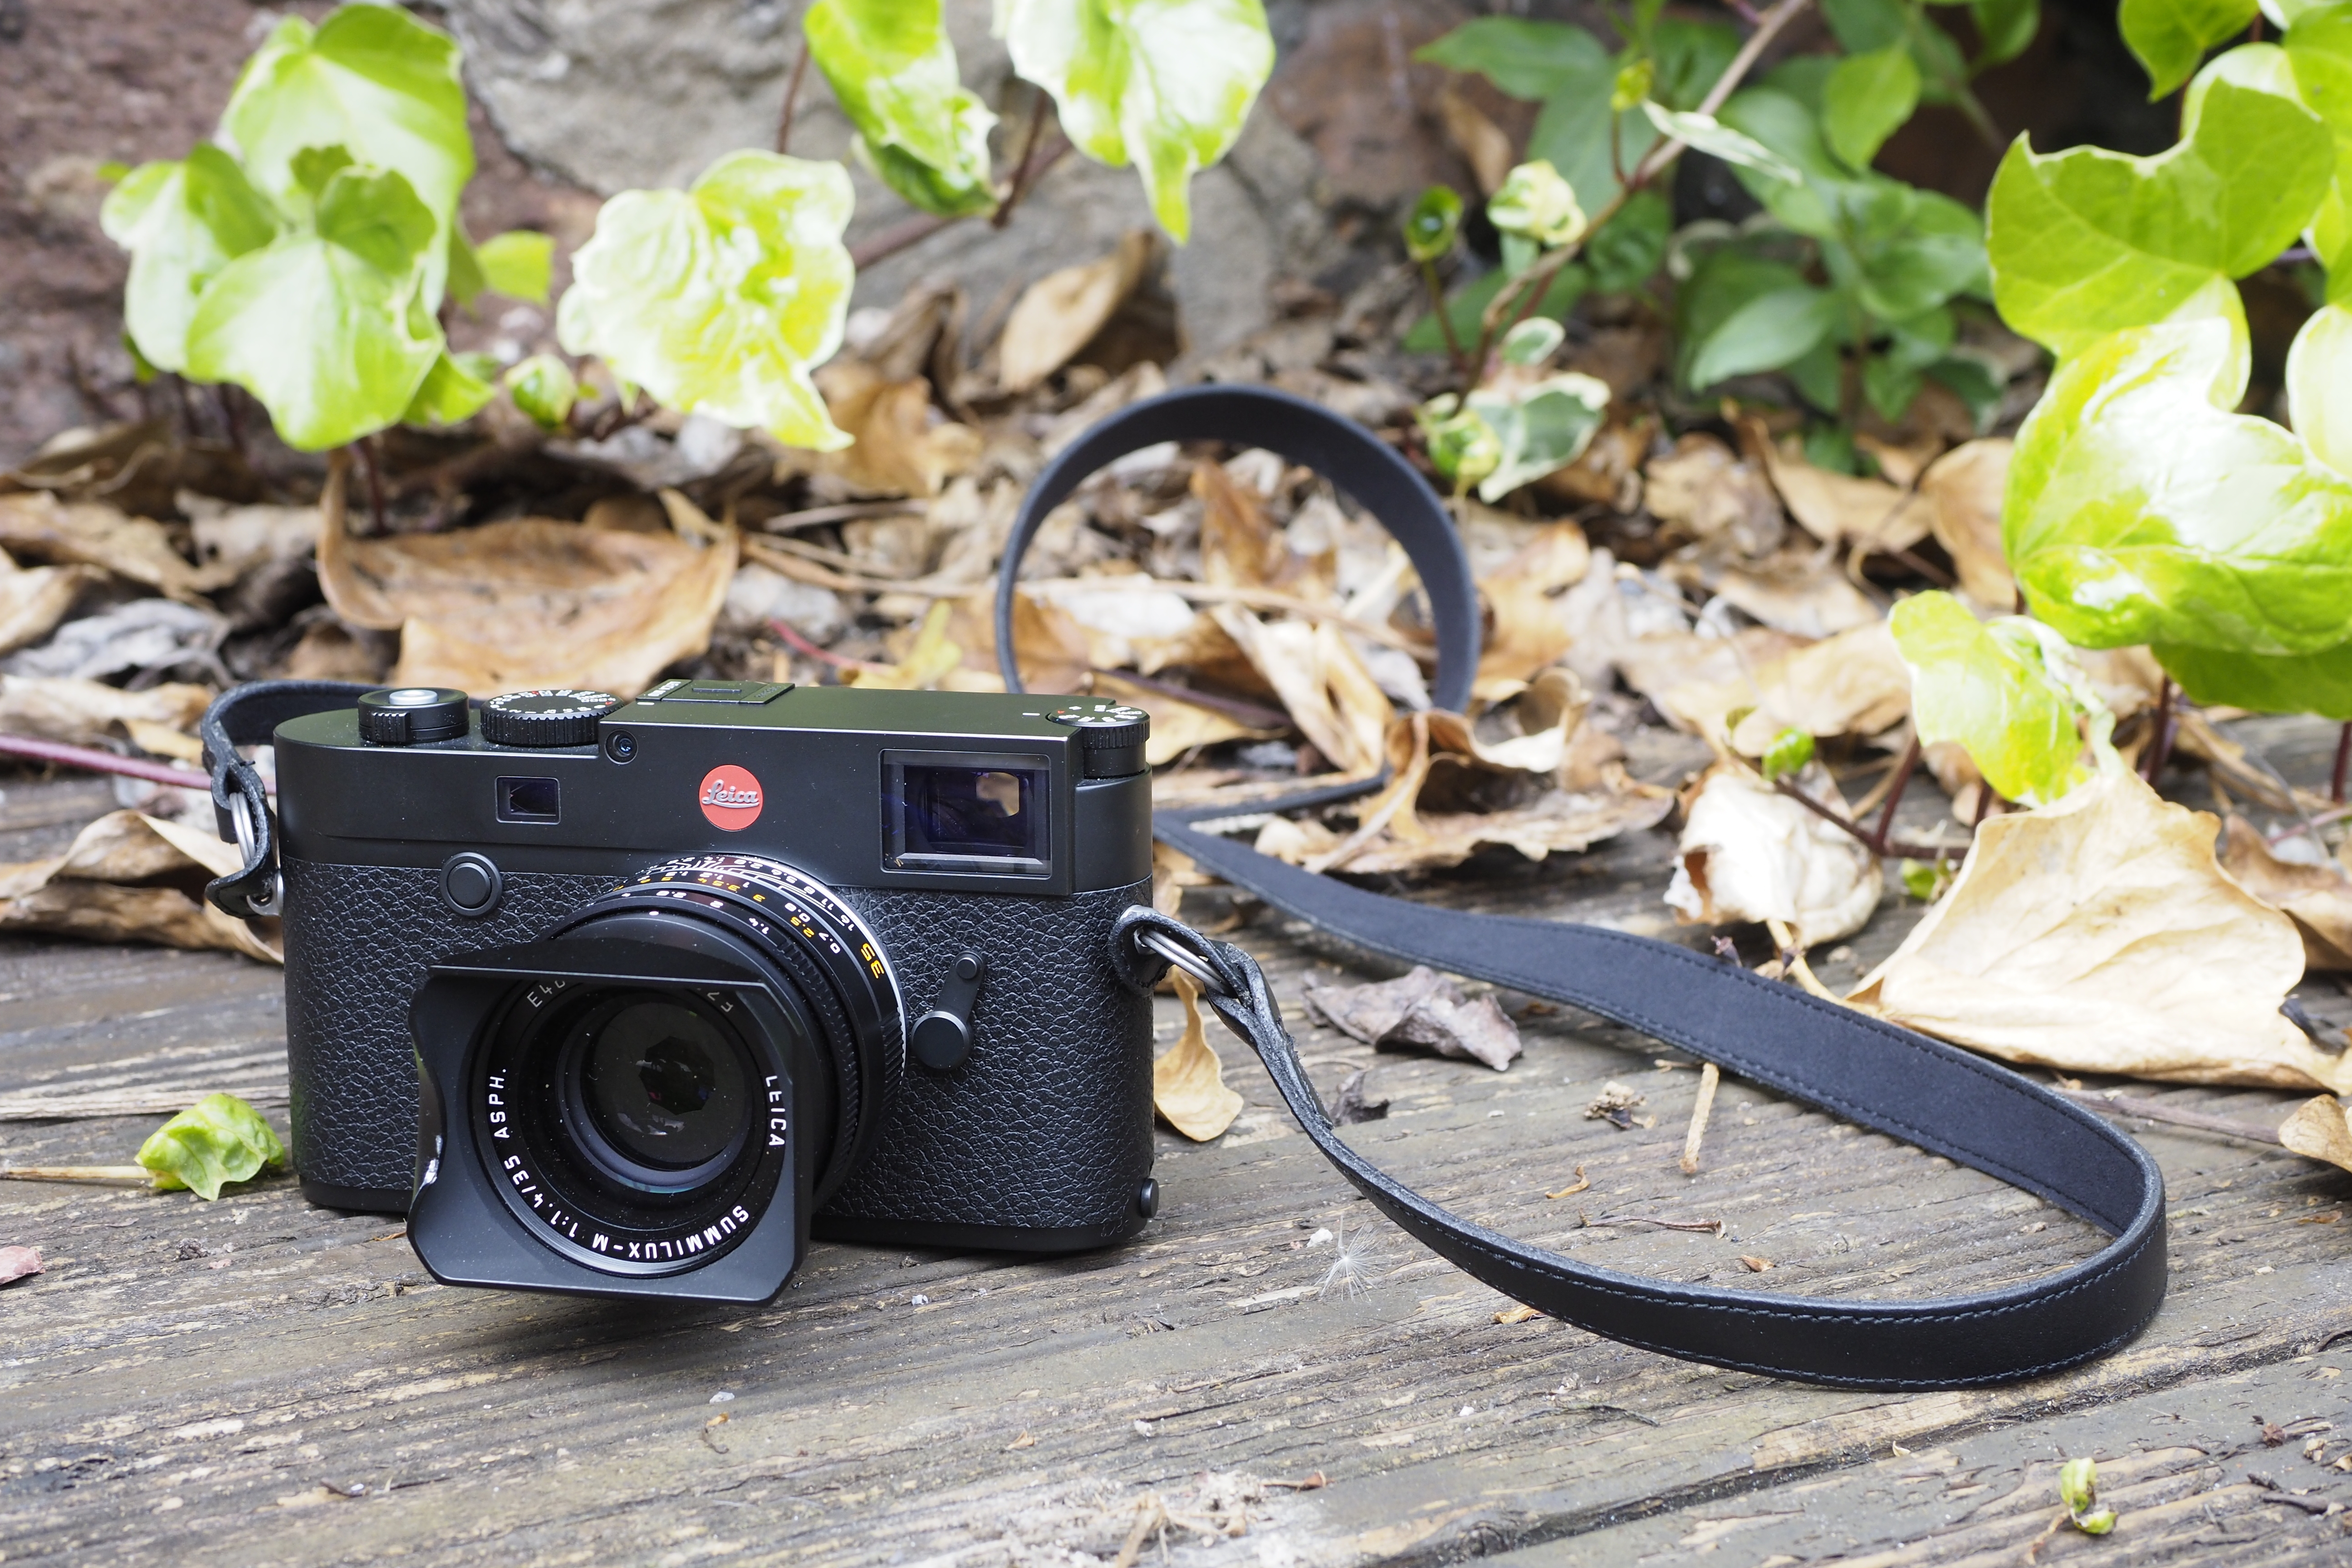 Leica M10 full-frame compact system camera review - hands on